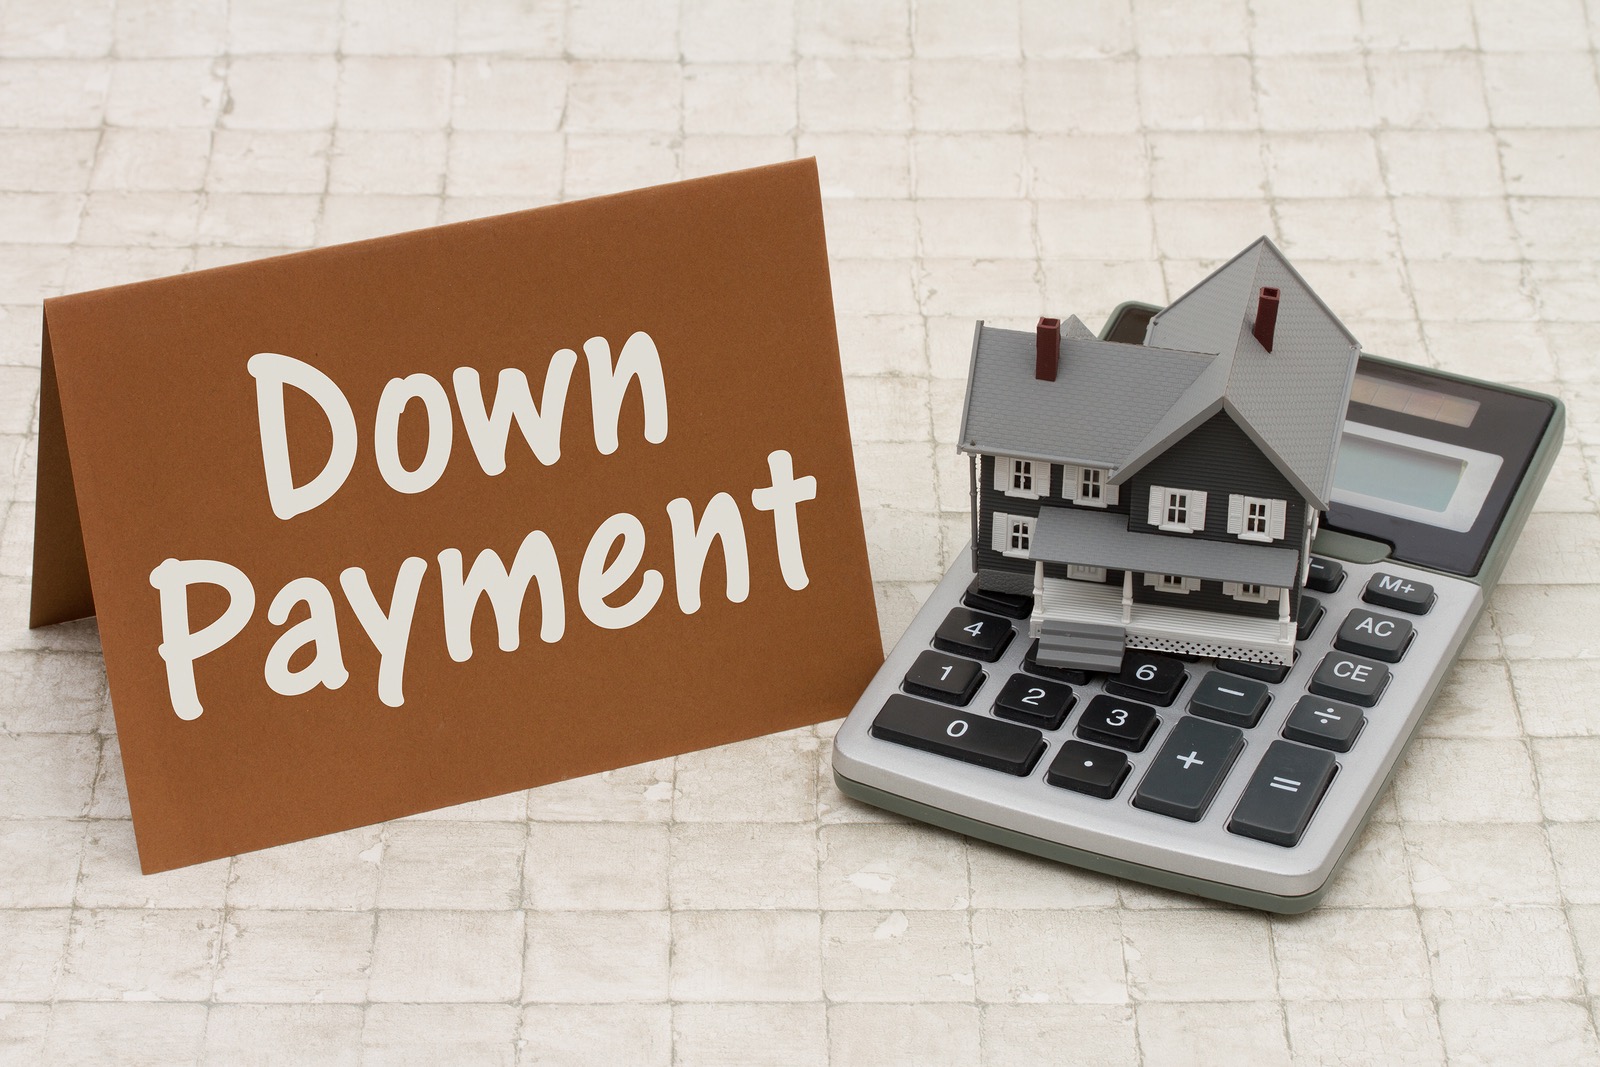 Home Mortgage Down Payment A gray house brown card and calculator on stone background with text Down Payment